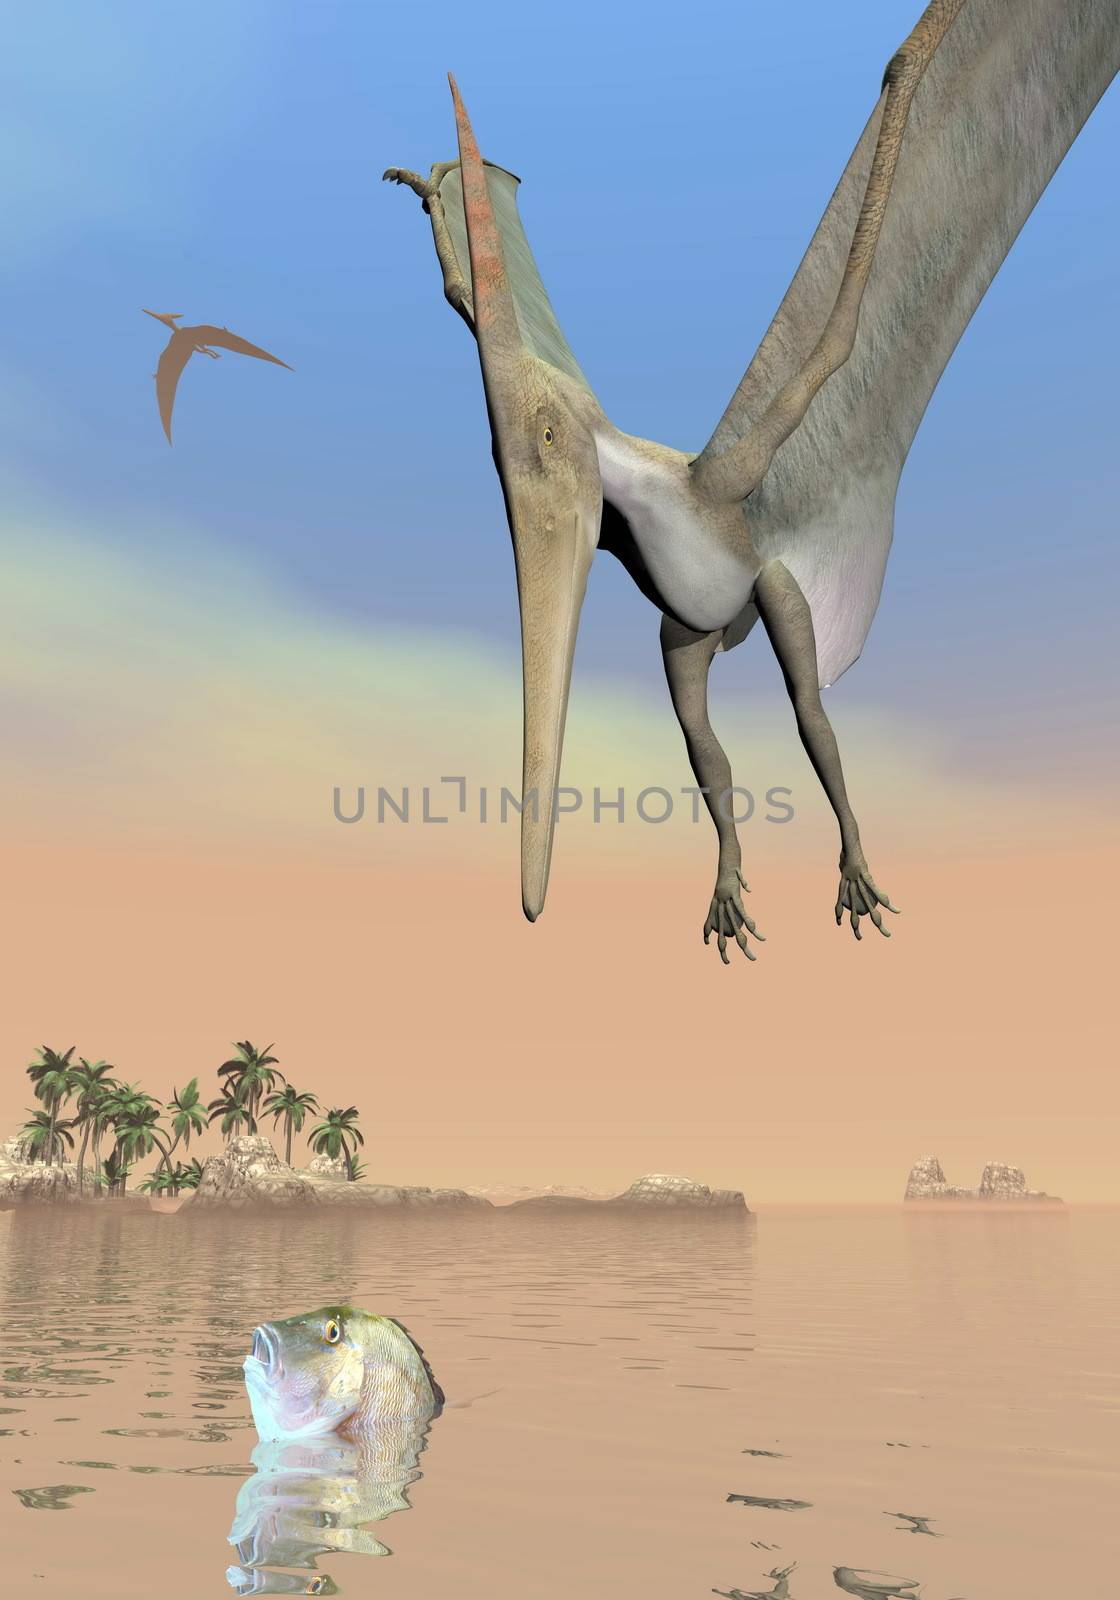 One pteranodon dinosaur fishing while flying upon landscape with hills, palm trees and water in cloudy sunset sky